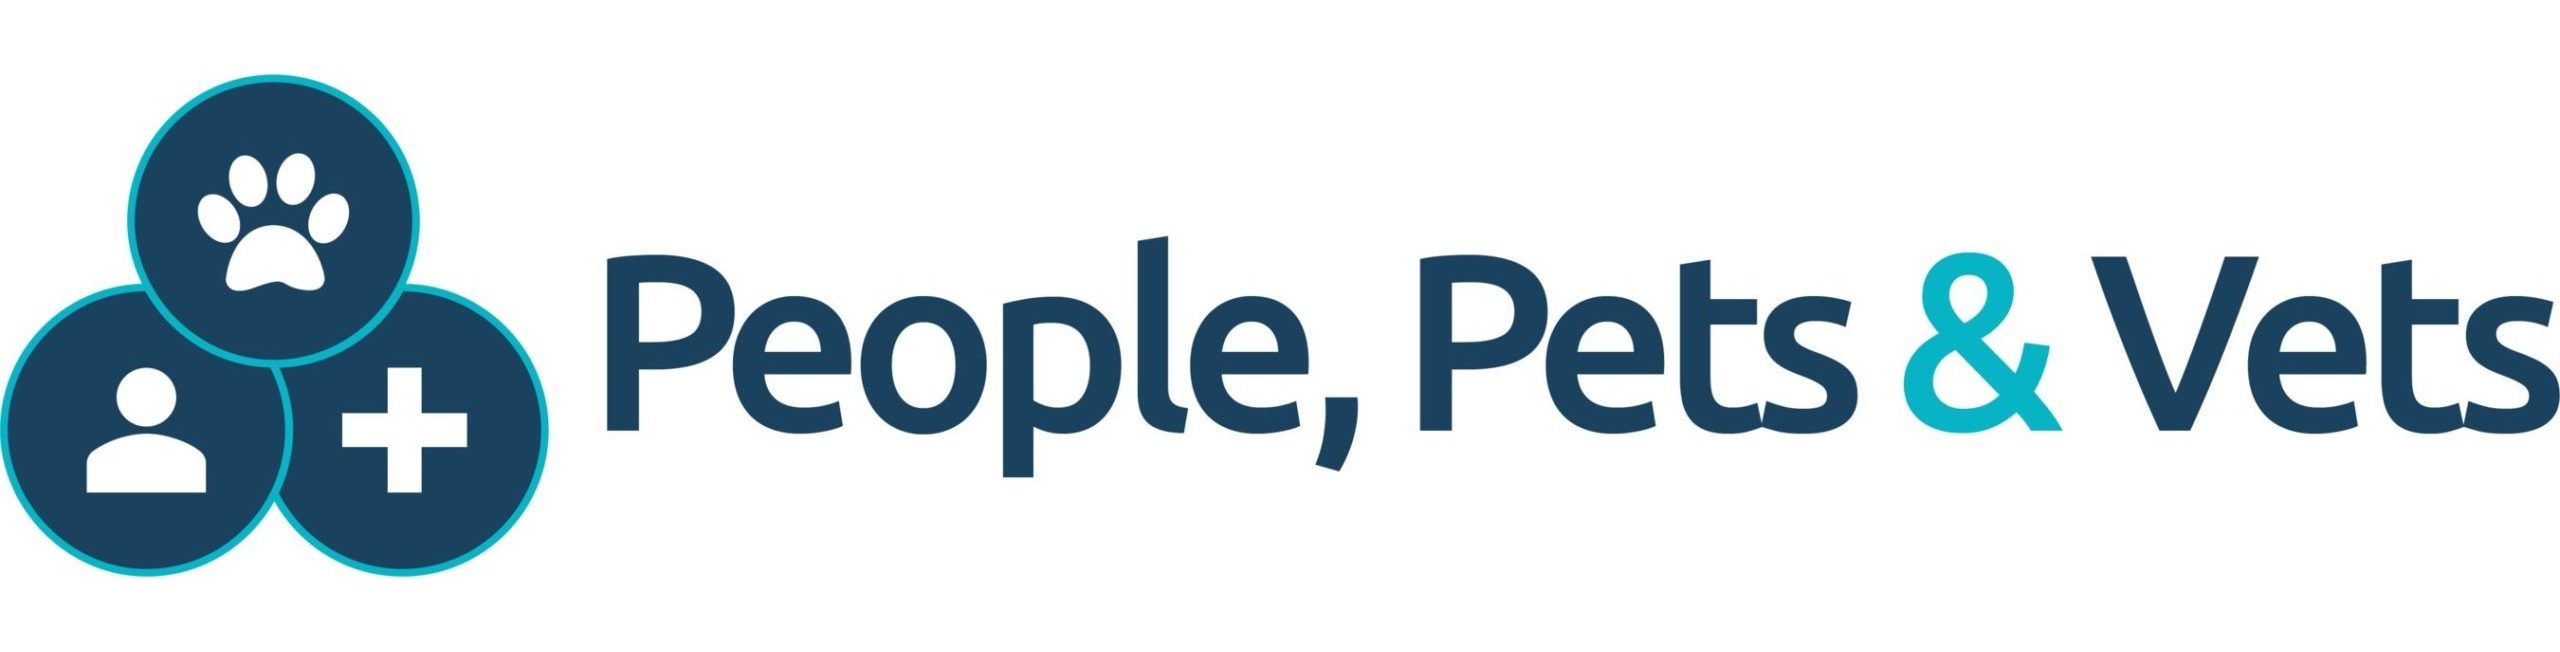 People, Pets and Vets logo